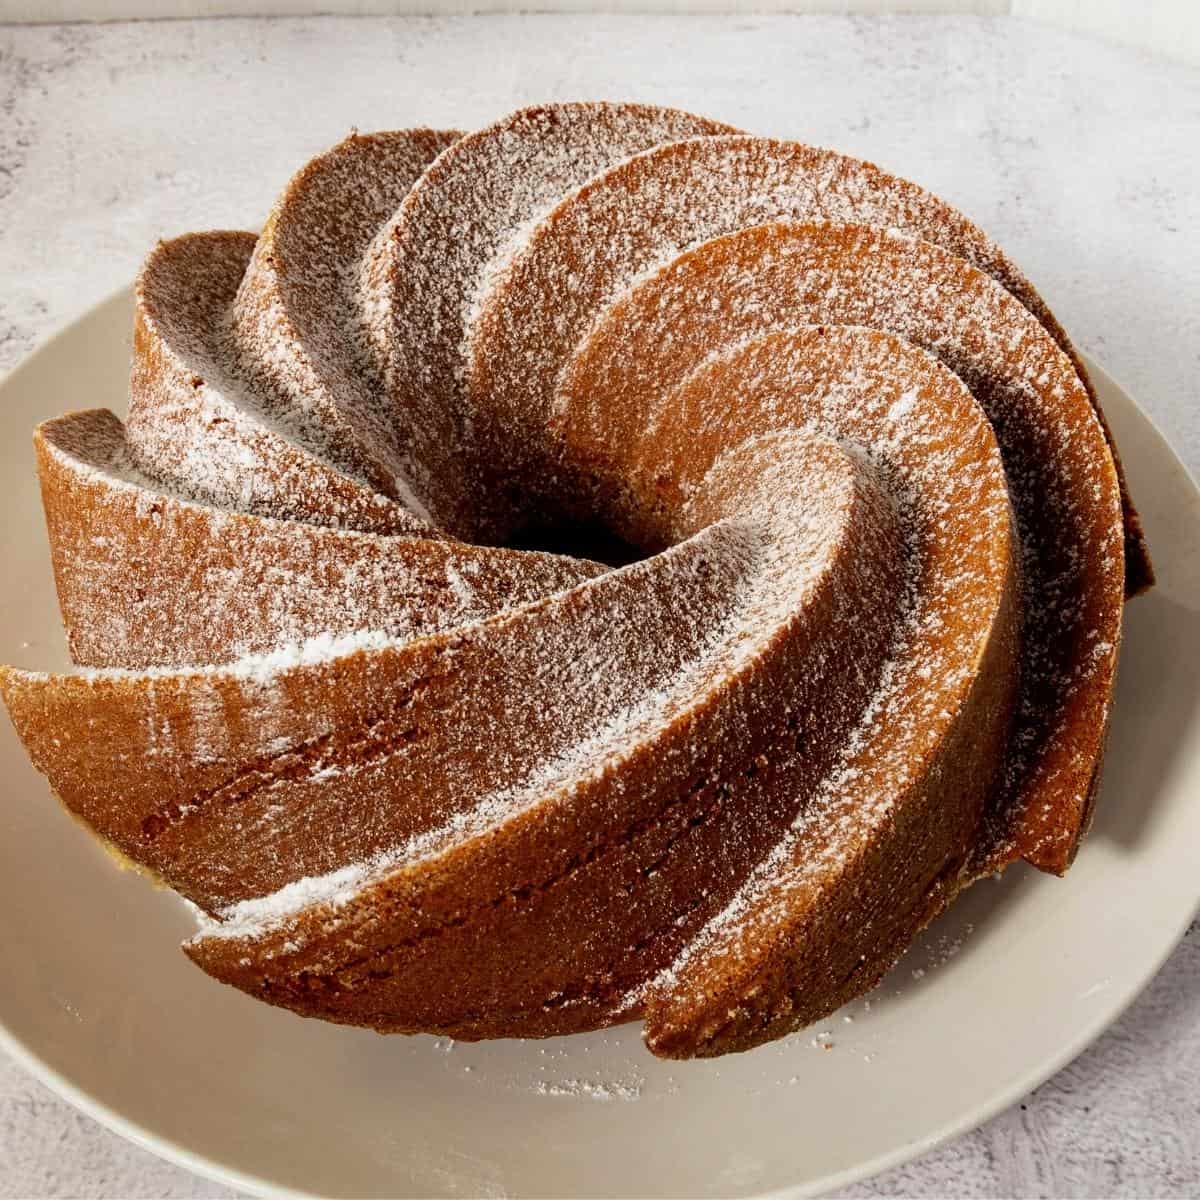 Sugar dusted bundt cake on a plate.